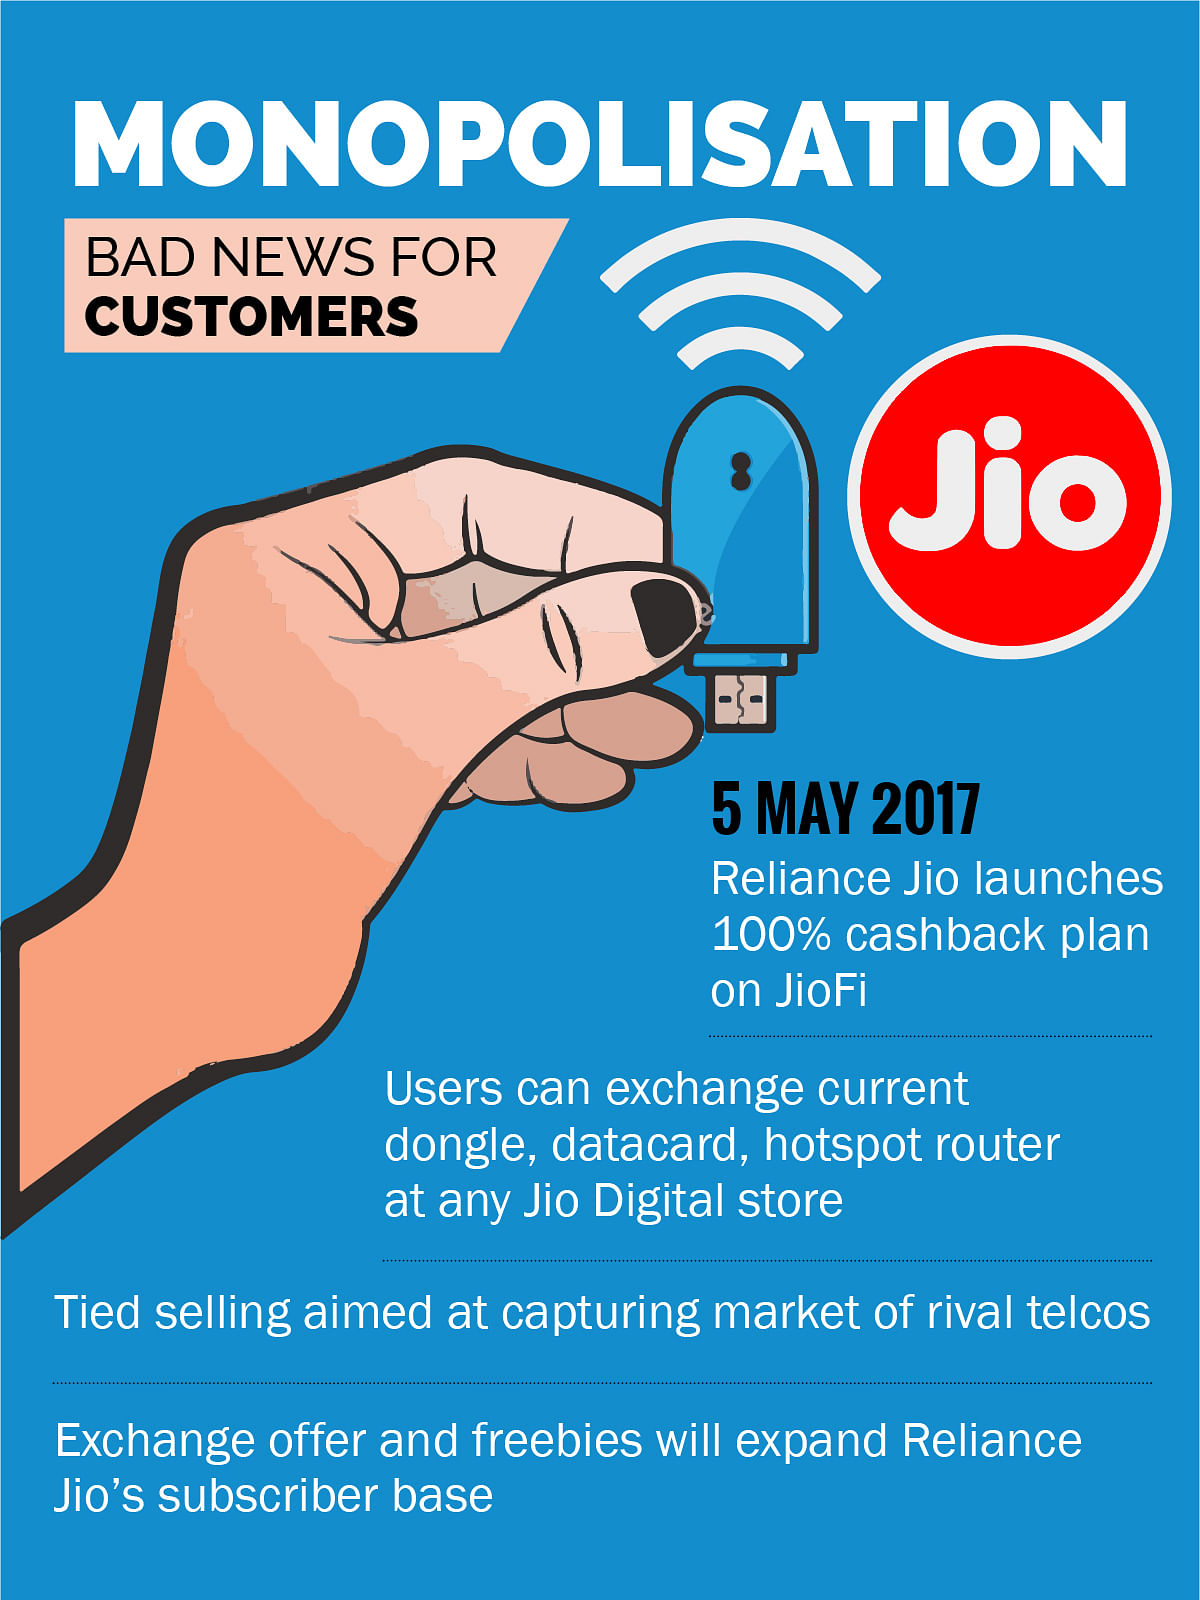 Monopolising the market, as Reliance Jio seeks to do, will short-change consumers with low quality and high prices.